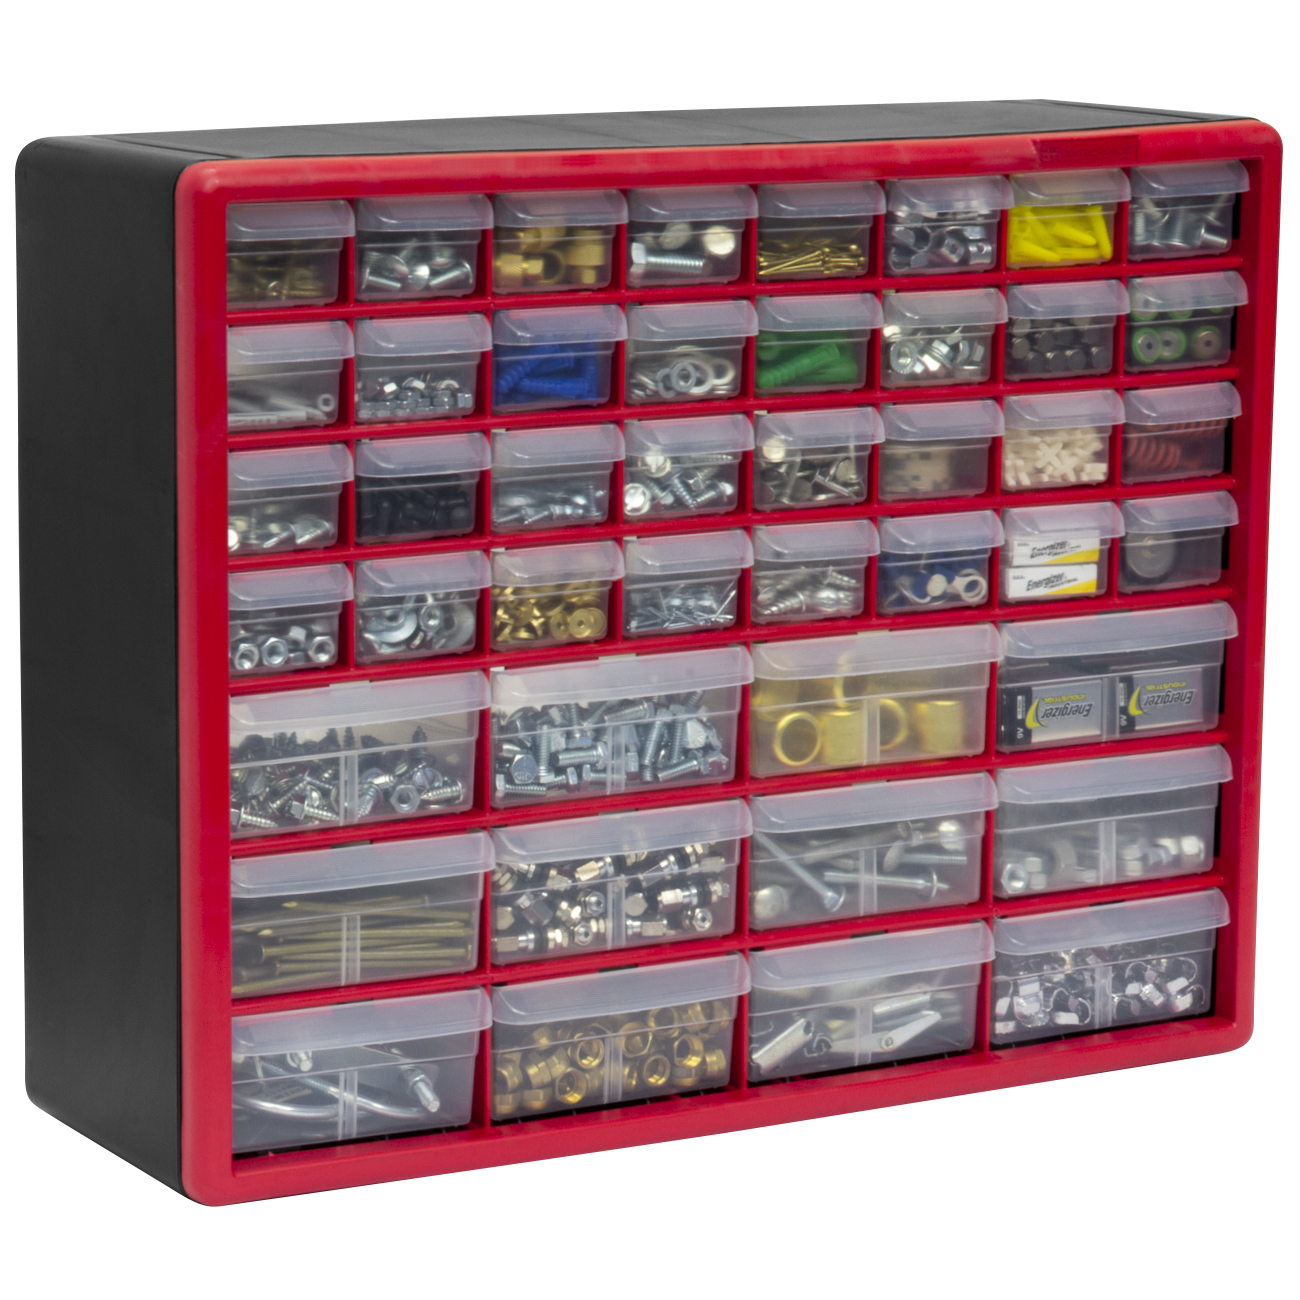 Akro-Mils 44 Drawer Plastic Cabinet Storage Organizer with Drawers for Hardware, Small Parts, Craft Supplies, Red - image 4 of 11